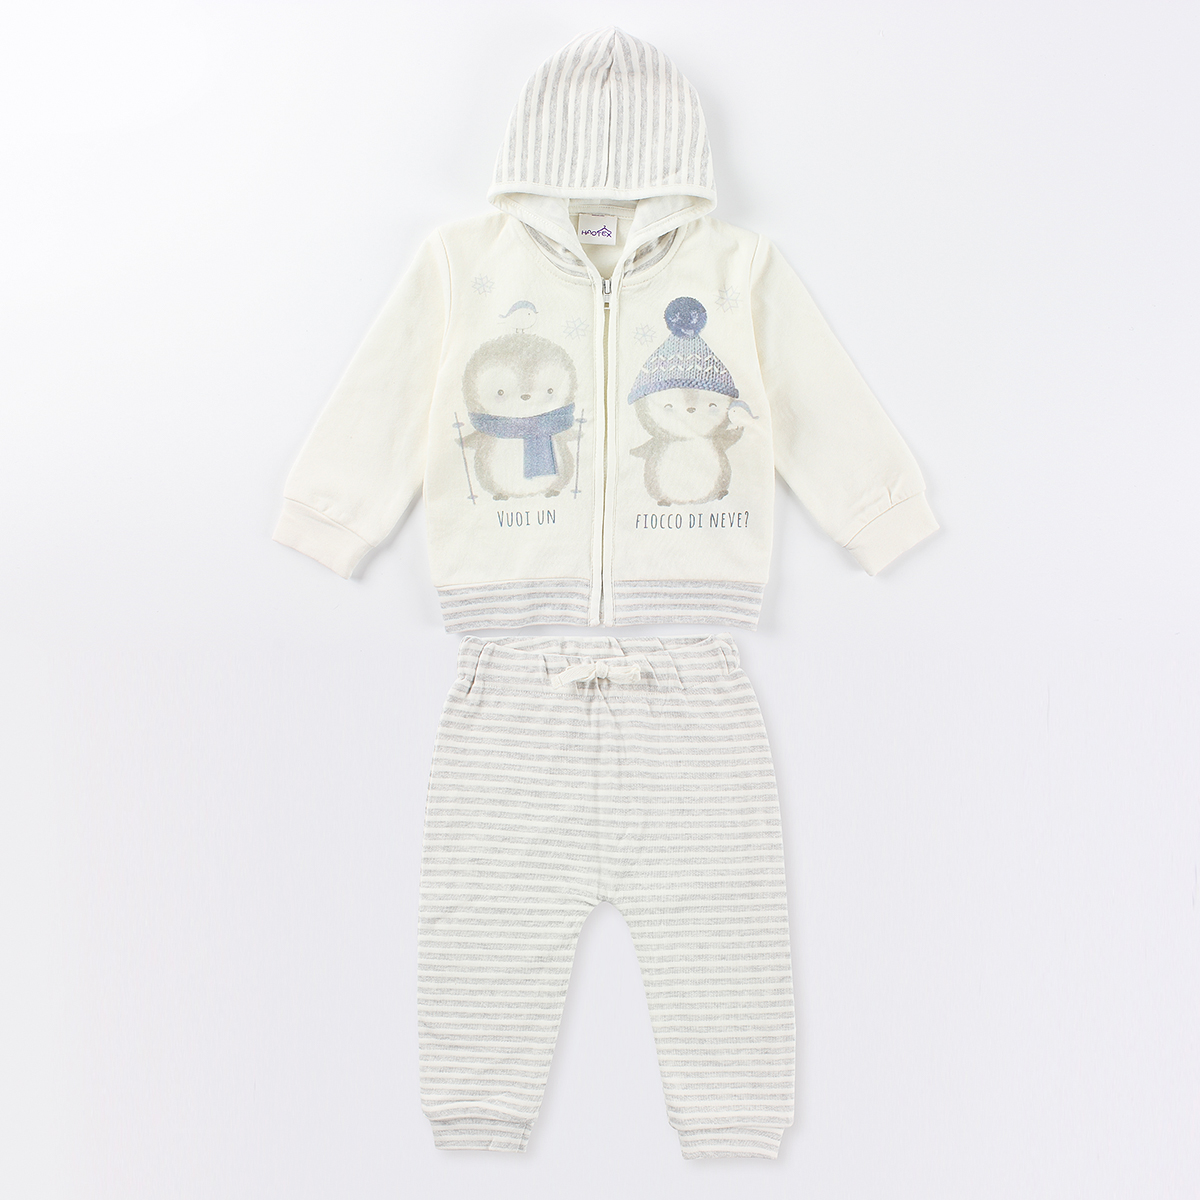 CO 4878 Modern Clothes Sets For Newborn Baby